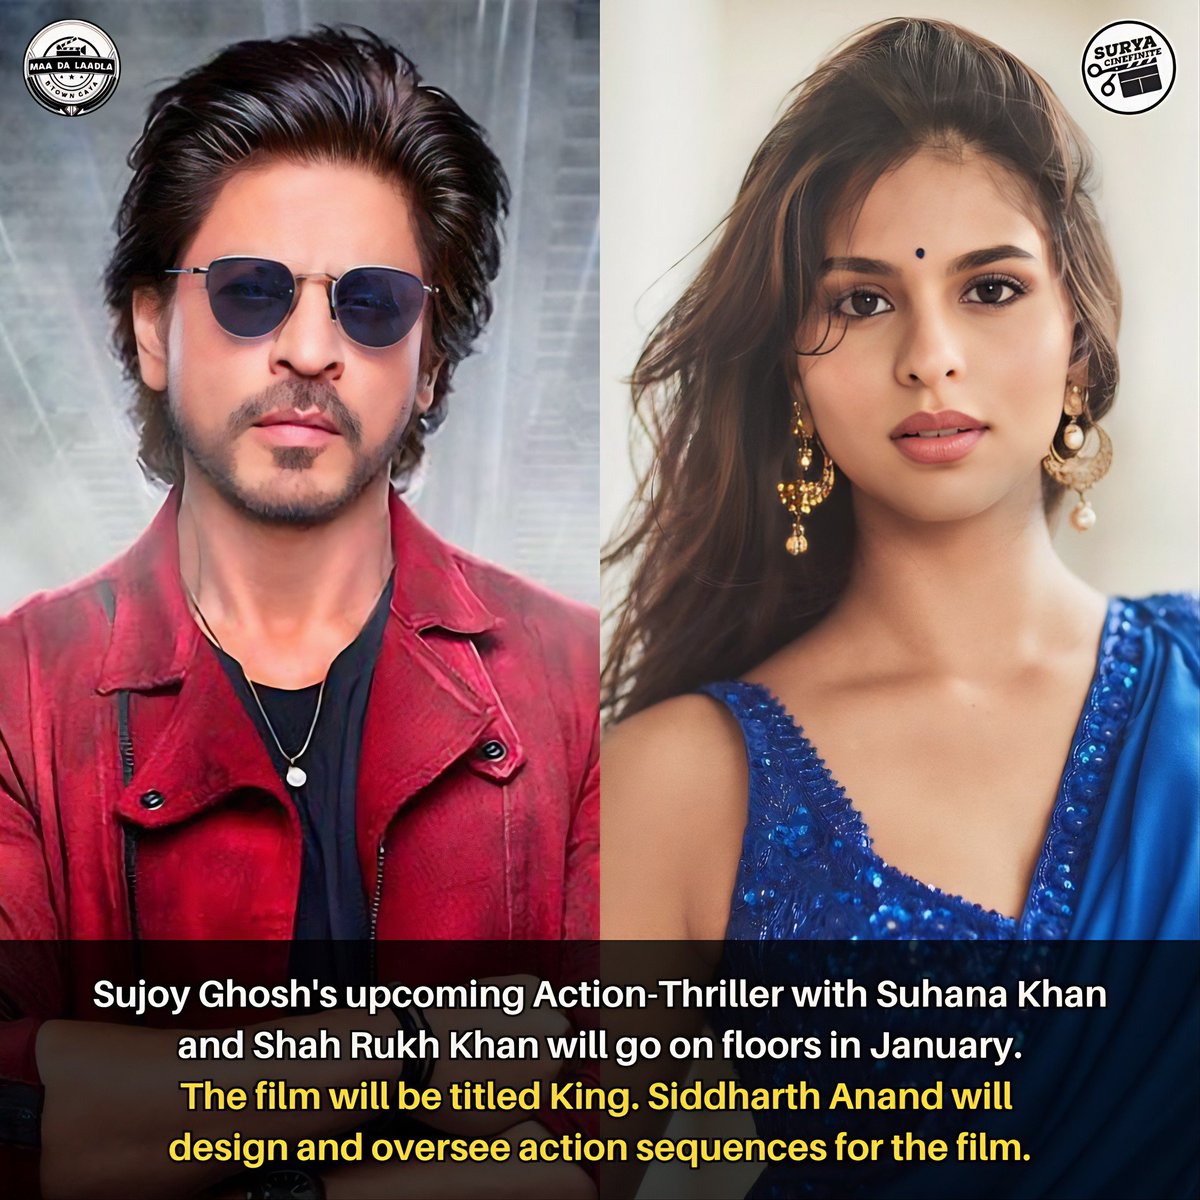 The #King and his daughter Queen will arrive soon. The SSS Action-Thriller! 😎🔥❤️

#ShahRukhKhan #SuhanaKhan #SujoyGhosh